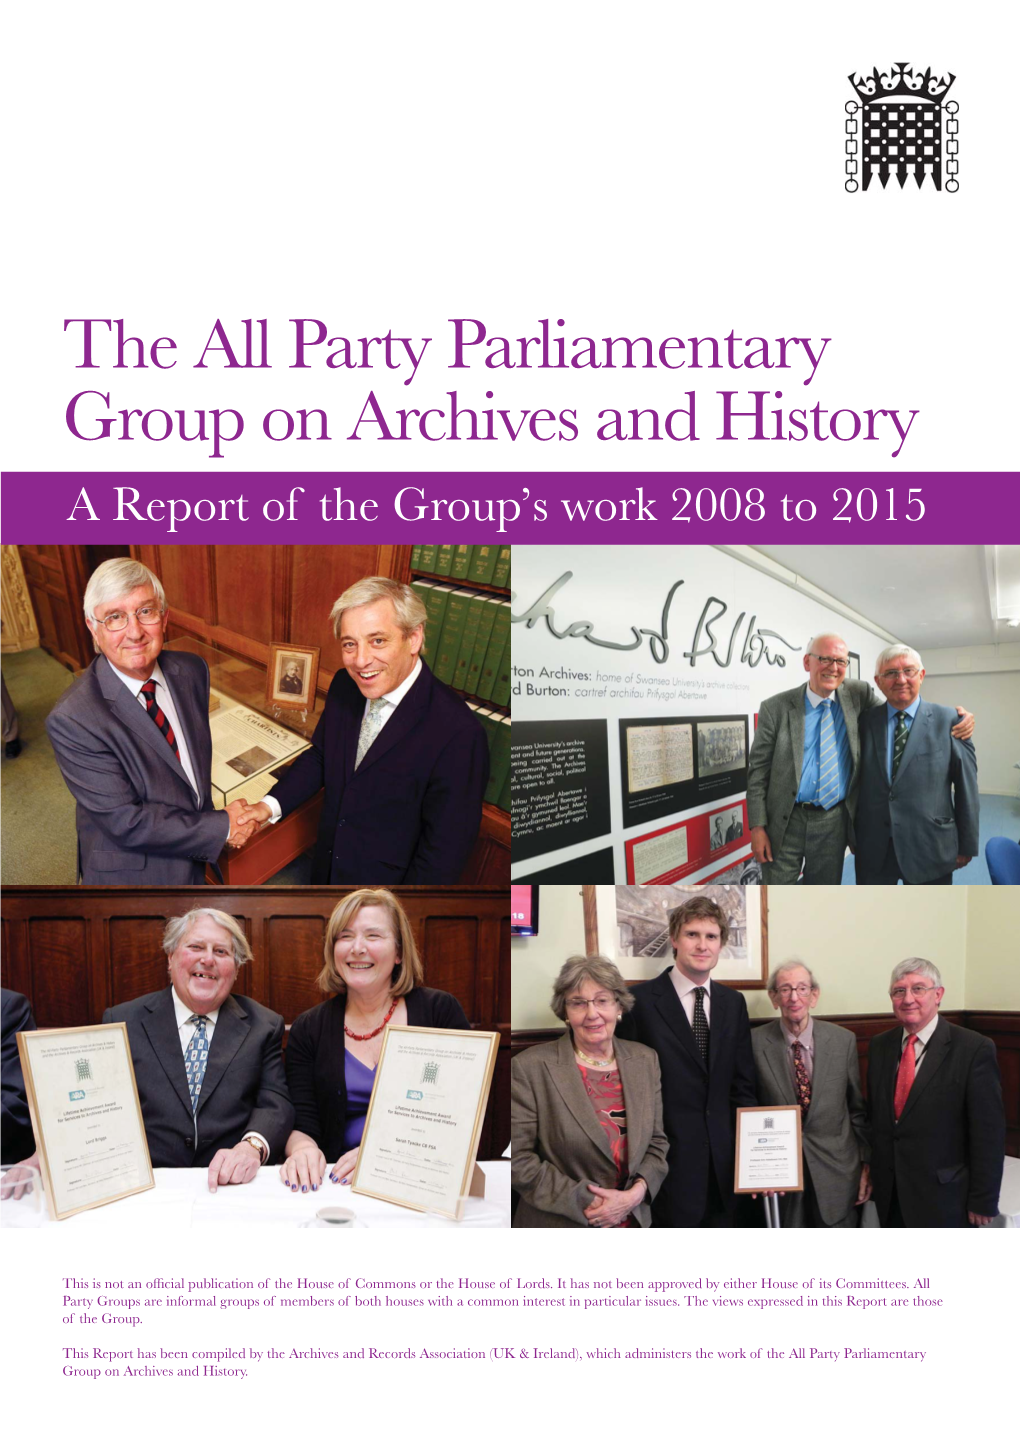 All Party Parliamentary Group on Archives and History Report 2008